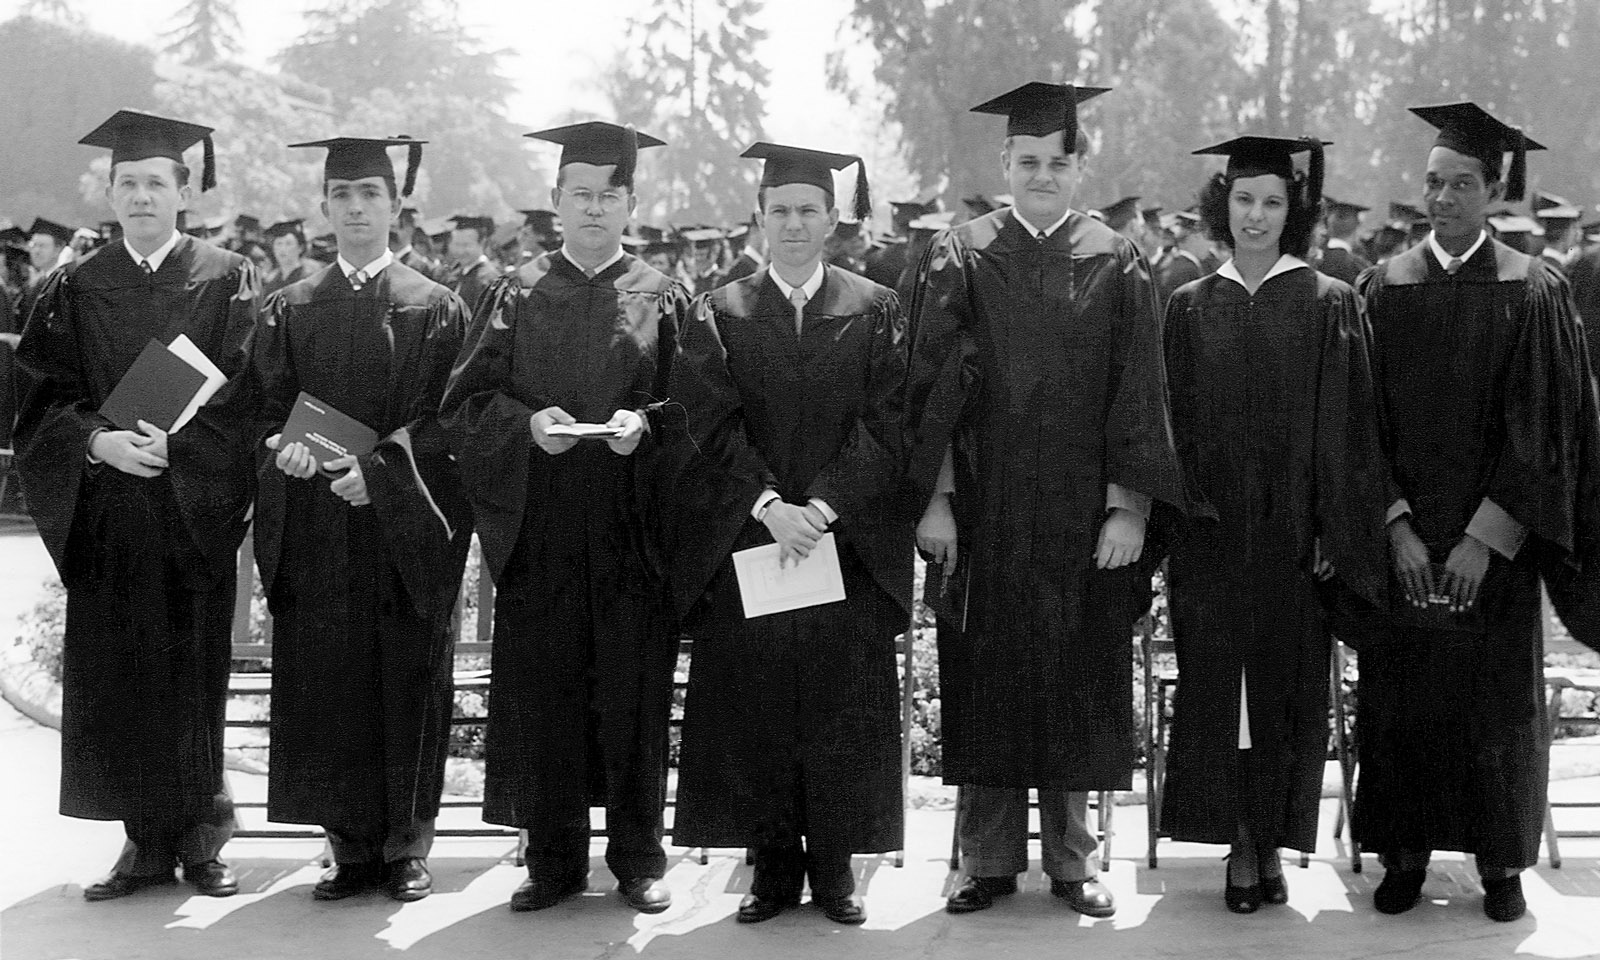 Some of the first graduates of Los Angeles State College in 1948 pose for a photo. This was officially the first Commencement, h